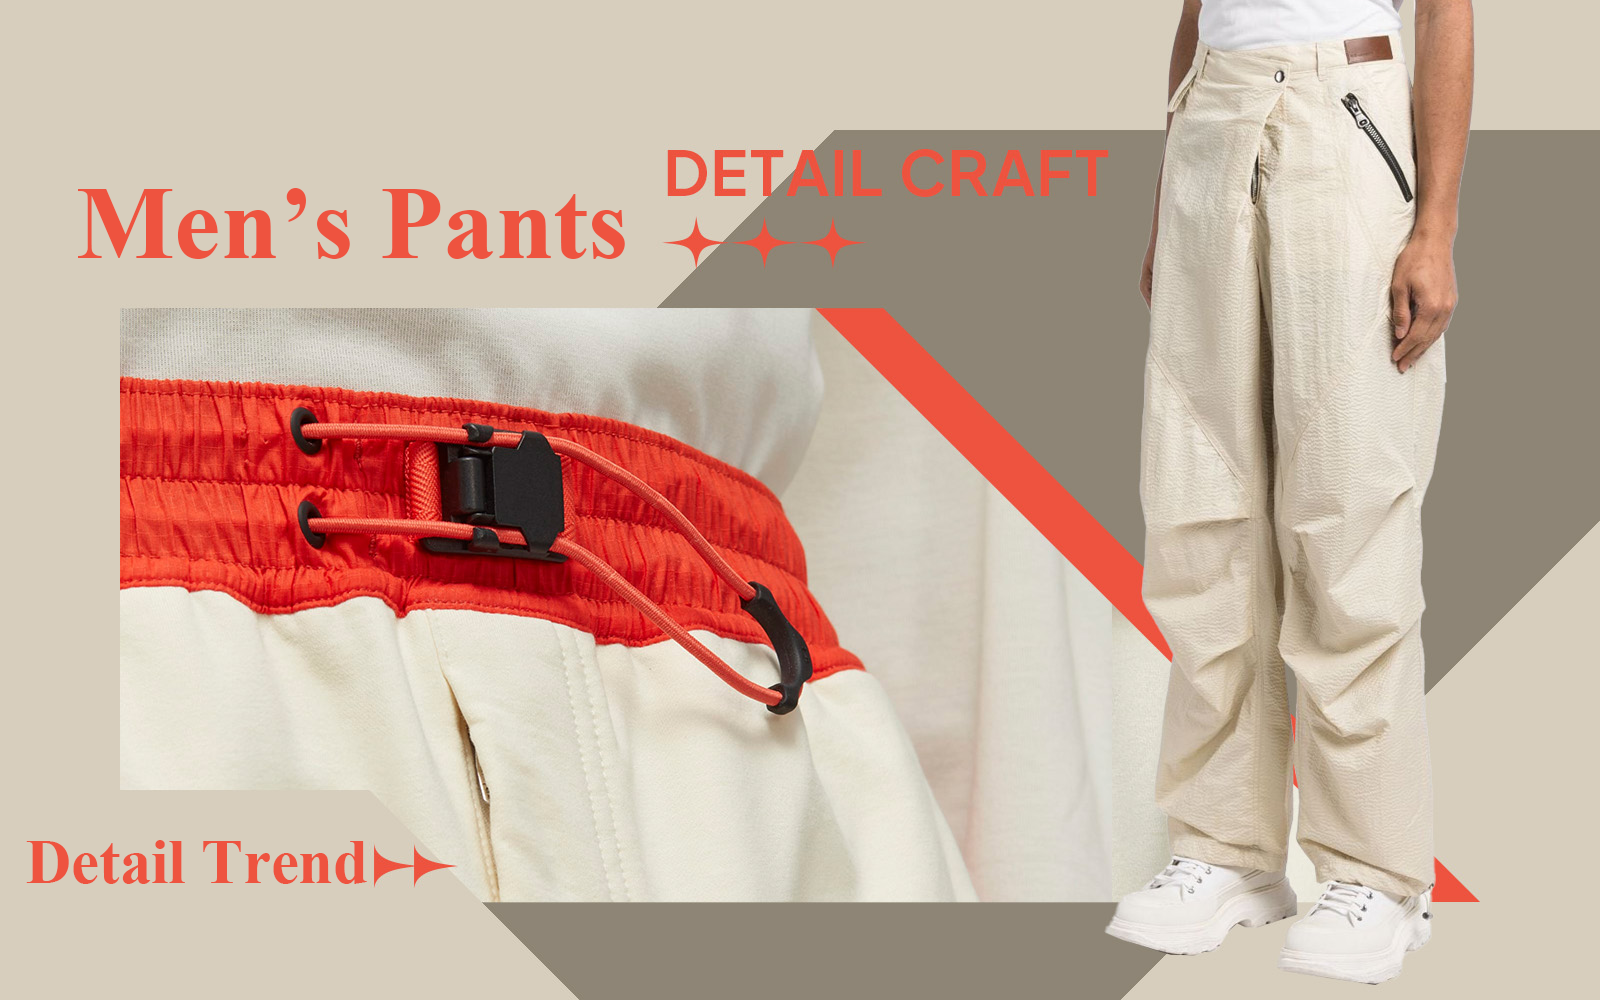 The Detail & Craft Trend for Men's Pants